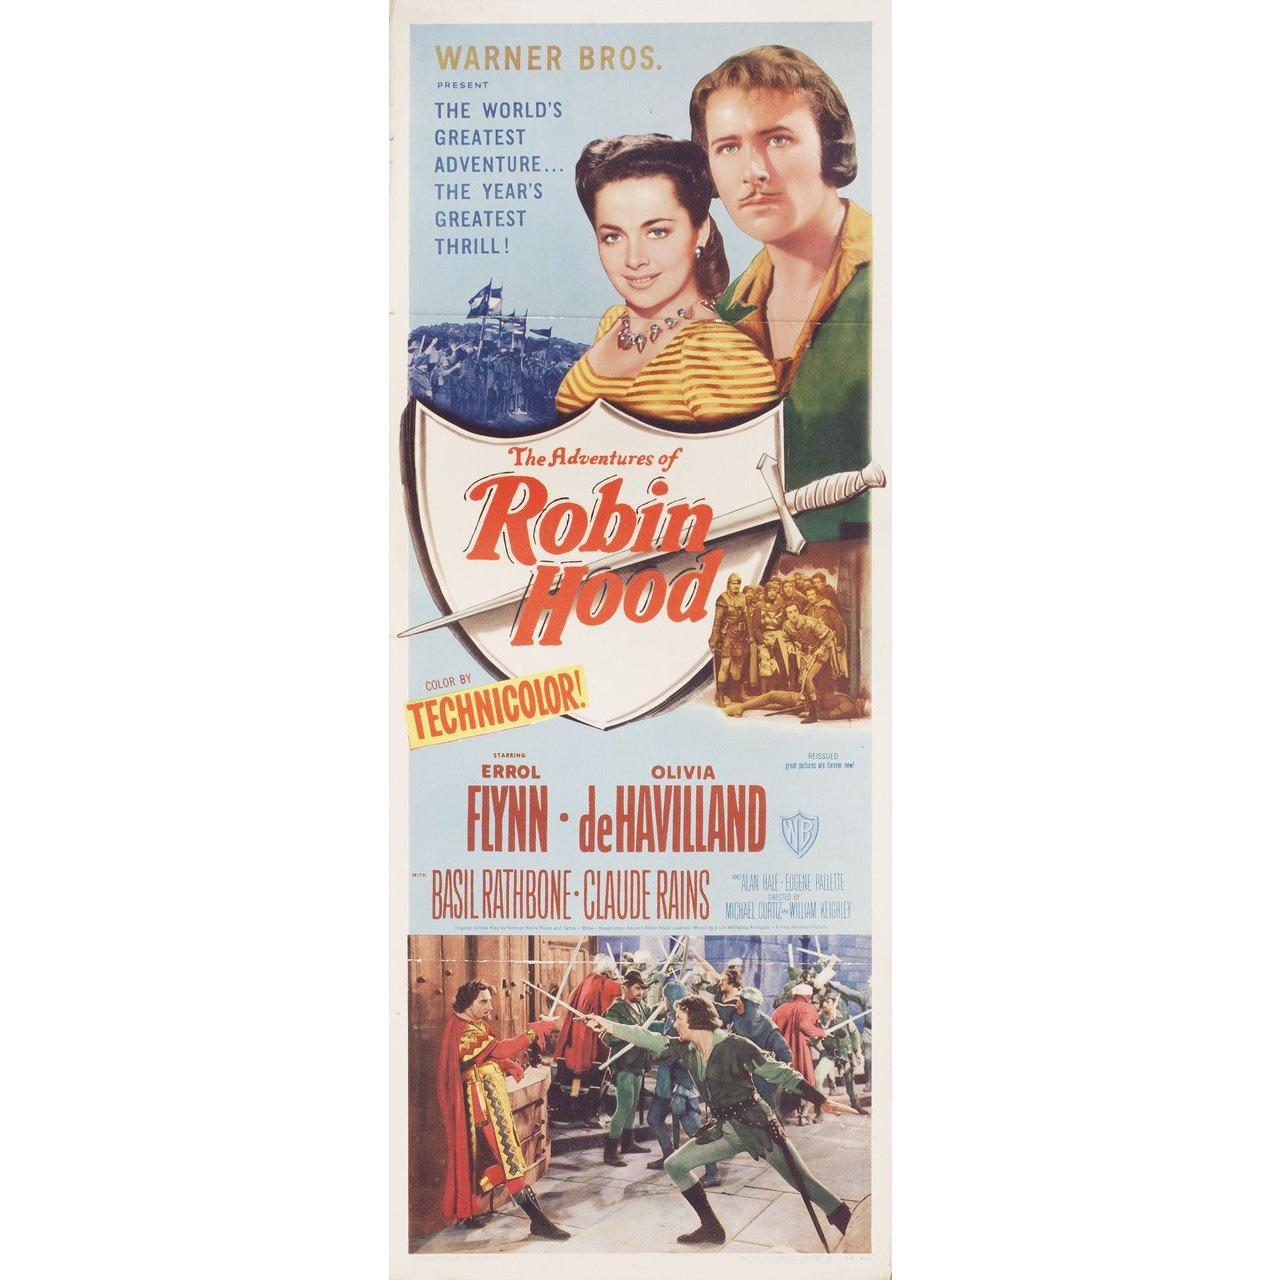 The Adventures of Robin Hood R1948 U.S. Insert Film Poster For Sale